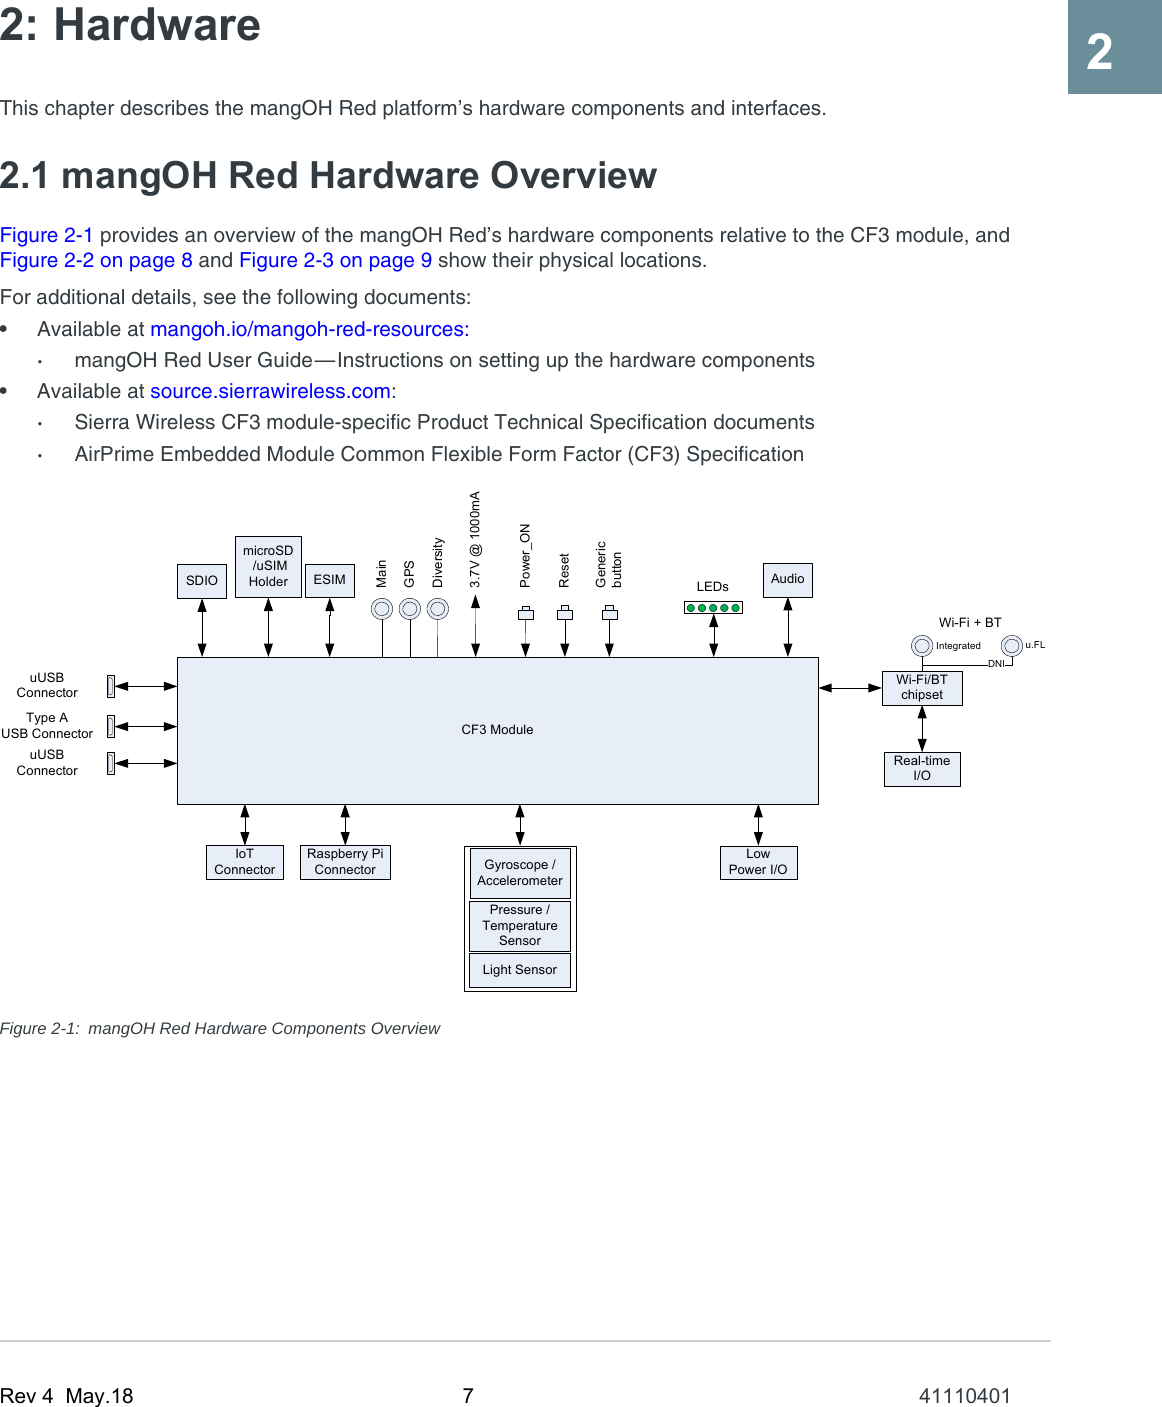 Rev 4  May.18 7 4111040122: HardwareThis chapter describes the mangOH Red platform’s hardware components and interfaces.2.1 mangOH Red Hardware OverviewFigure 2-1 provides an overview of the mangOH Red’s hardware components relative to the CF3 module, and Figure 2-2 on page 8 and Figure 2-3 on page 9 show their physical locations.For additional details, see the following documents:•Available at mangoh.io/mangoh-red-resources:·mangOH Red User Guide—Instructions on setting up the hardware components•Available at source.sierrawireless.com:·Sierra Wireless CF3 module-specific Product Technical Specification documents·AirPrime Embedded Module Common Flexible Form Factor (CF3) SpecificationFigure 2-1: mangOH Red Hardware Components OverviewCF3 ModuleSDIOWi-Fi/BT chipsetIoT ConnectormicroSD /uSIM Holder ESIMMainDiversityGPSWi-Fi + BTLEDs3.7V @ 1000mAPower_ONResetAudiouUSB ConnectoruUSB ConnectorType AUSB ConnectorLow Power I/OReal-time I/OGeneric buttonRaspberry Pi ConnectorDNIIntegrated u.FLGyroscope /AccelerometerPressure /Temperature SensorLight Sensor